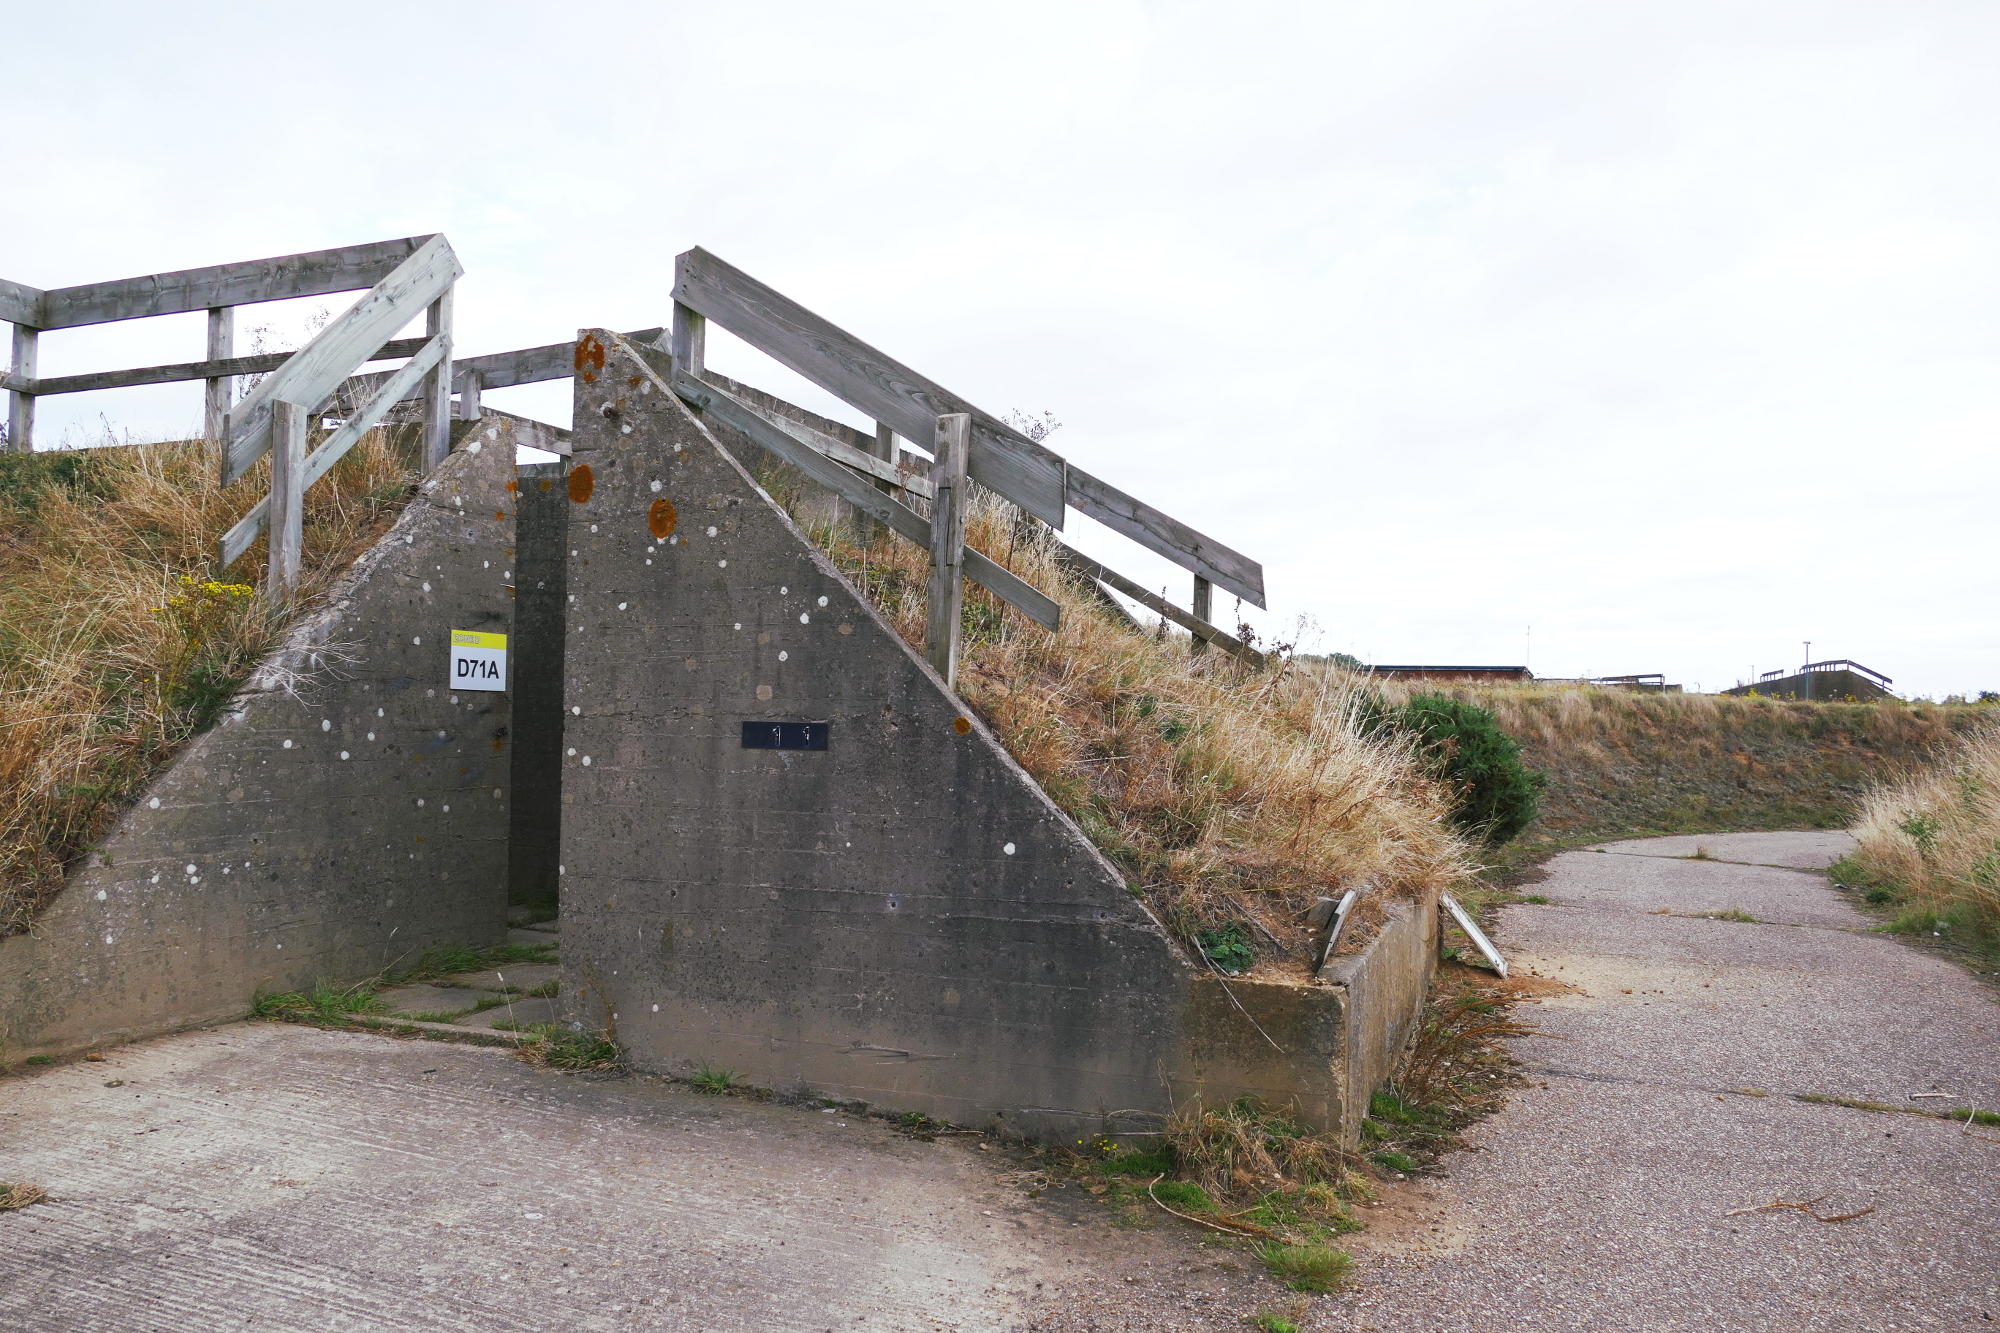 Exterior of old RAF industrial storage unit with concrete walls, concrete road and grass